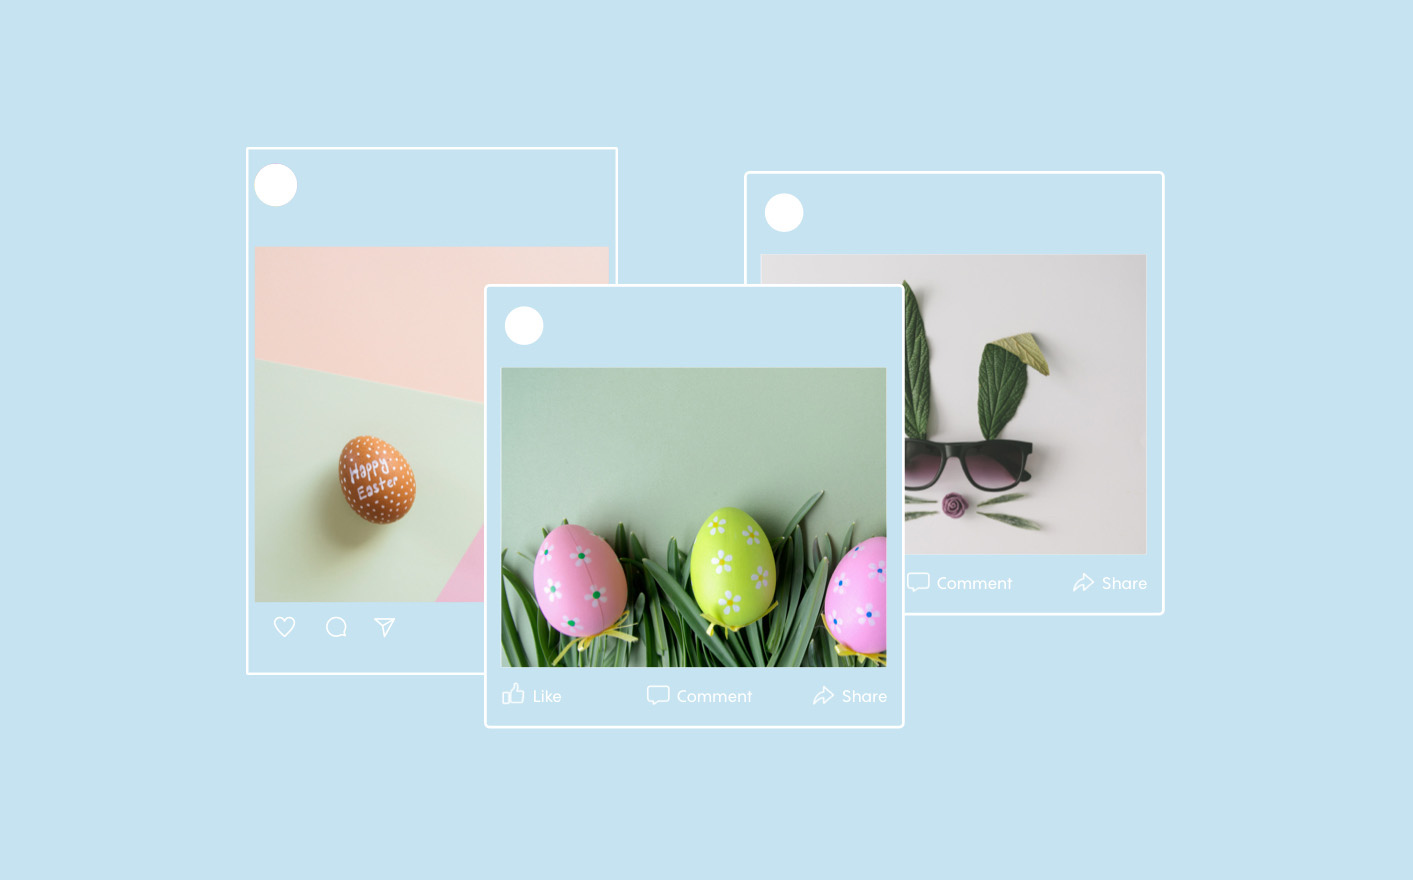 Google Easter Eggs: A Hidden Tool for Engaging Marketing